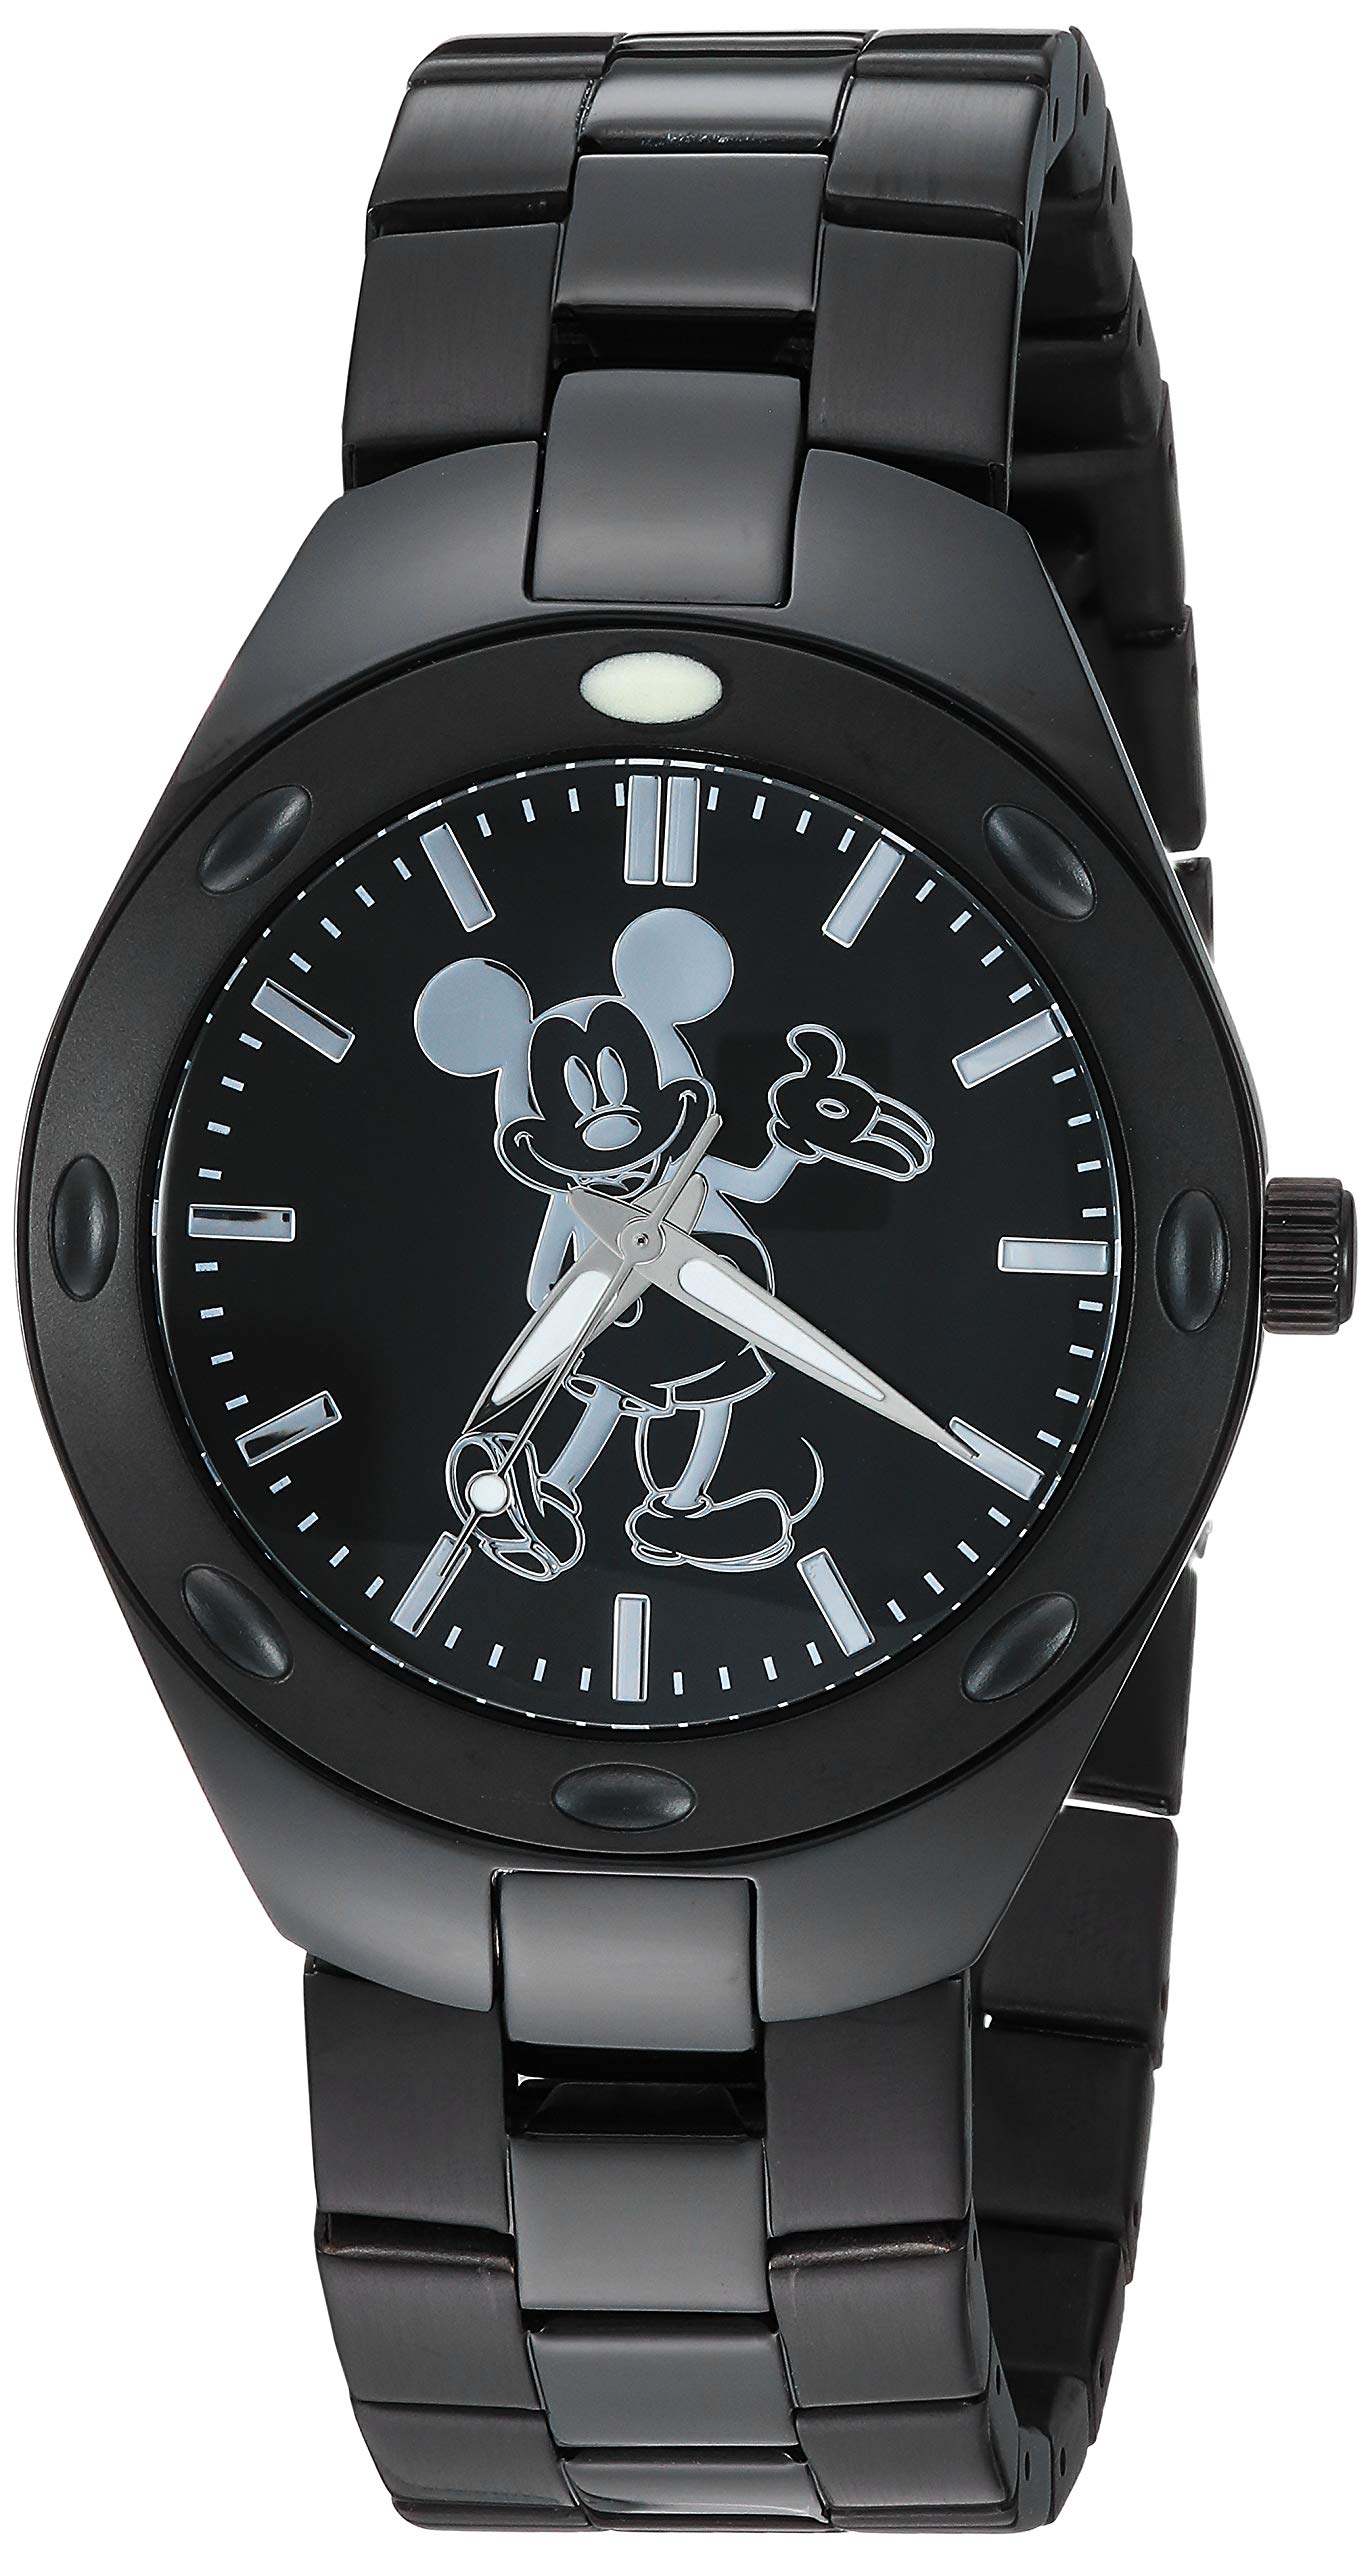 Disney Mens Mickey Mouse Analog-Quartz Watch with Stainless-Steel Strap Black 20 Model WDS000627